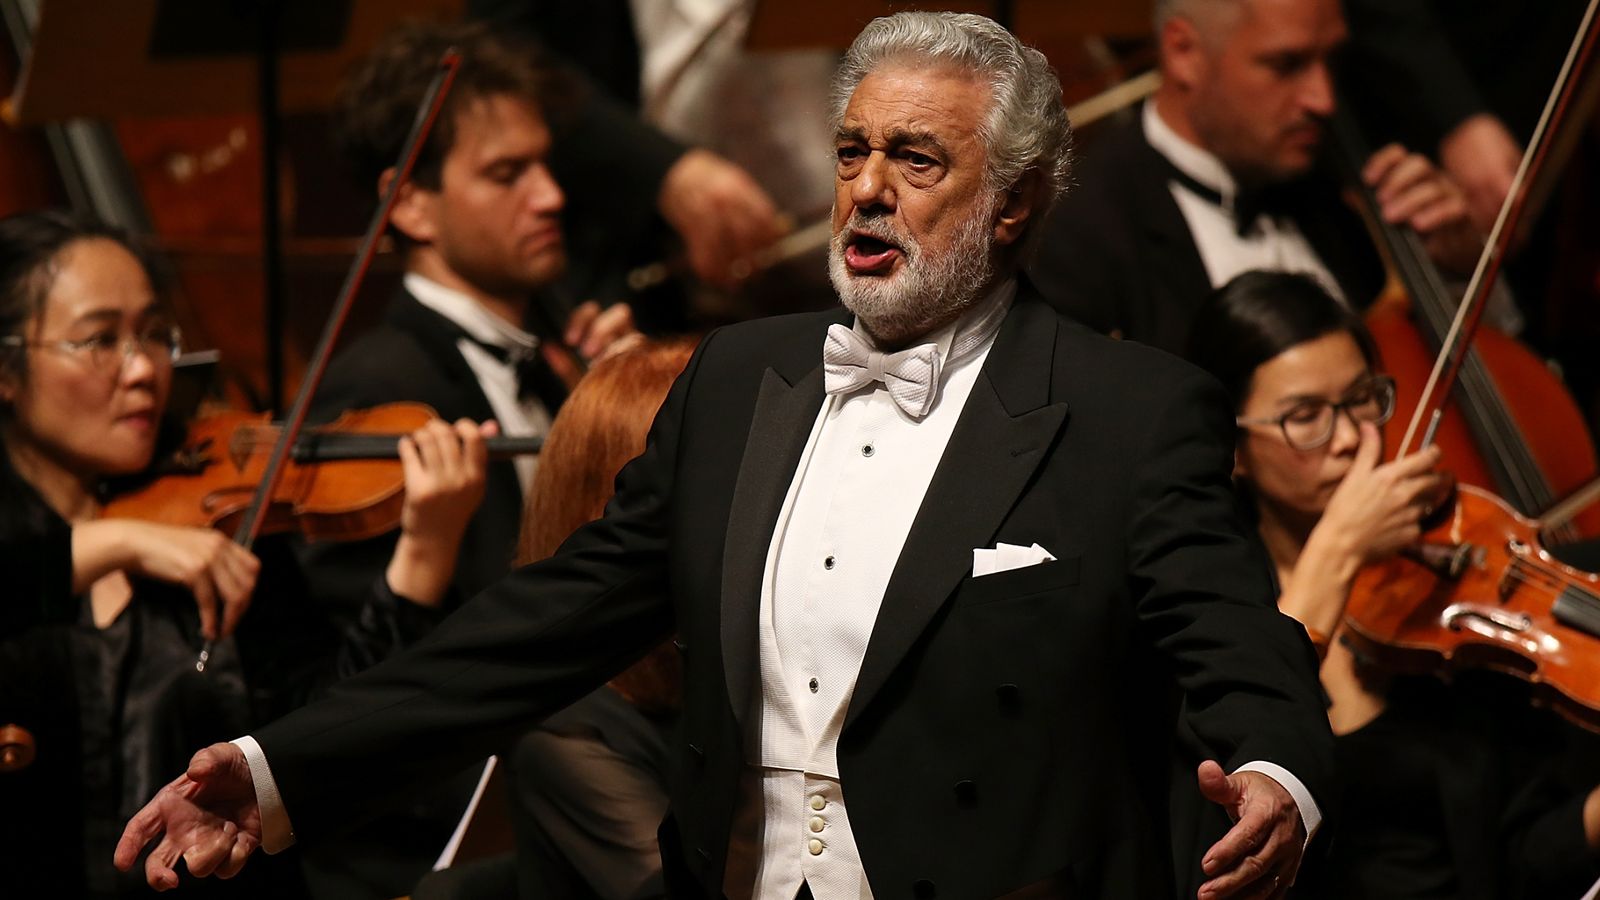 Placido Domingo: Opera star faces new accusations of sexual misconduct